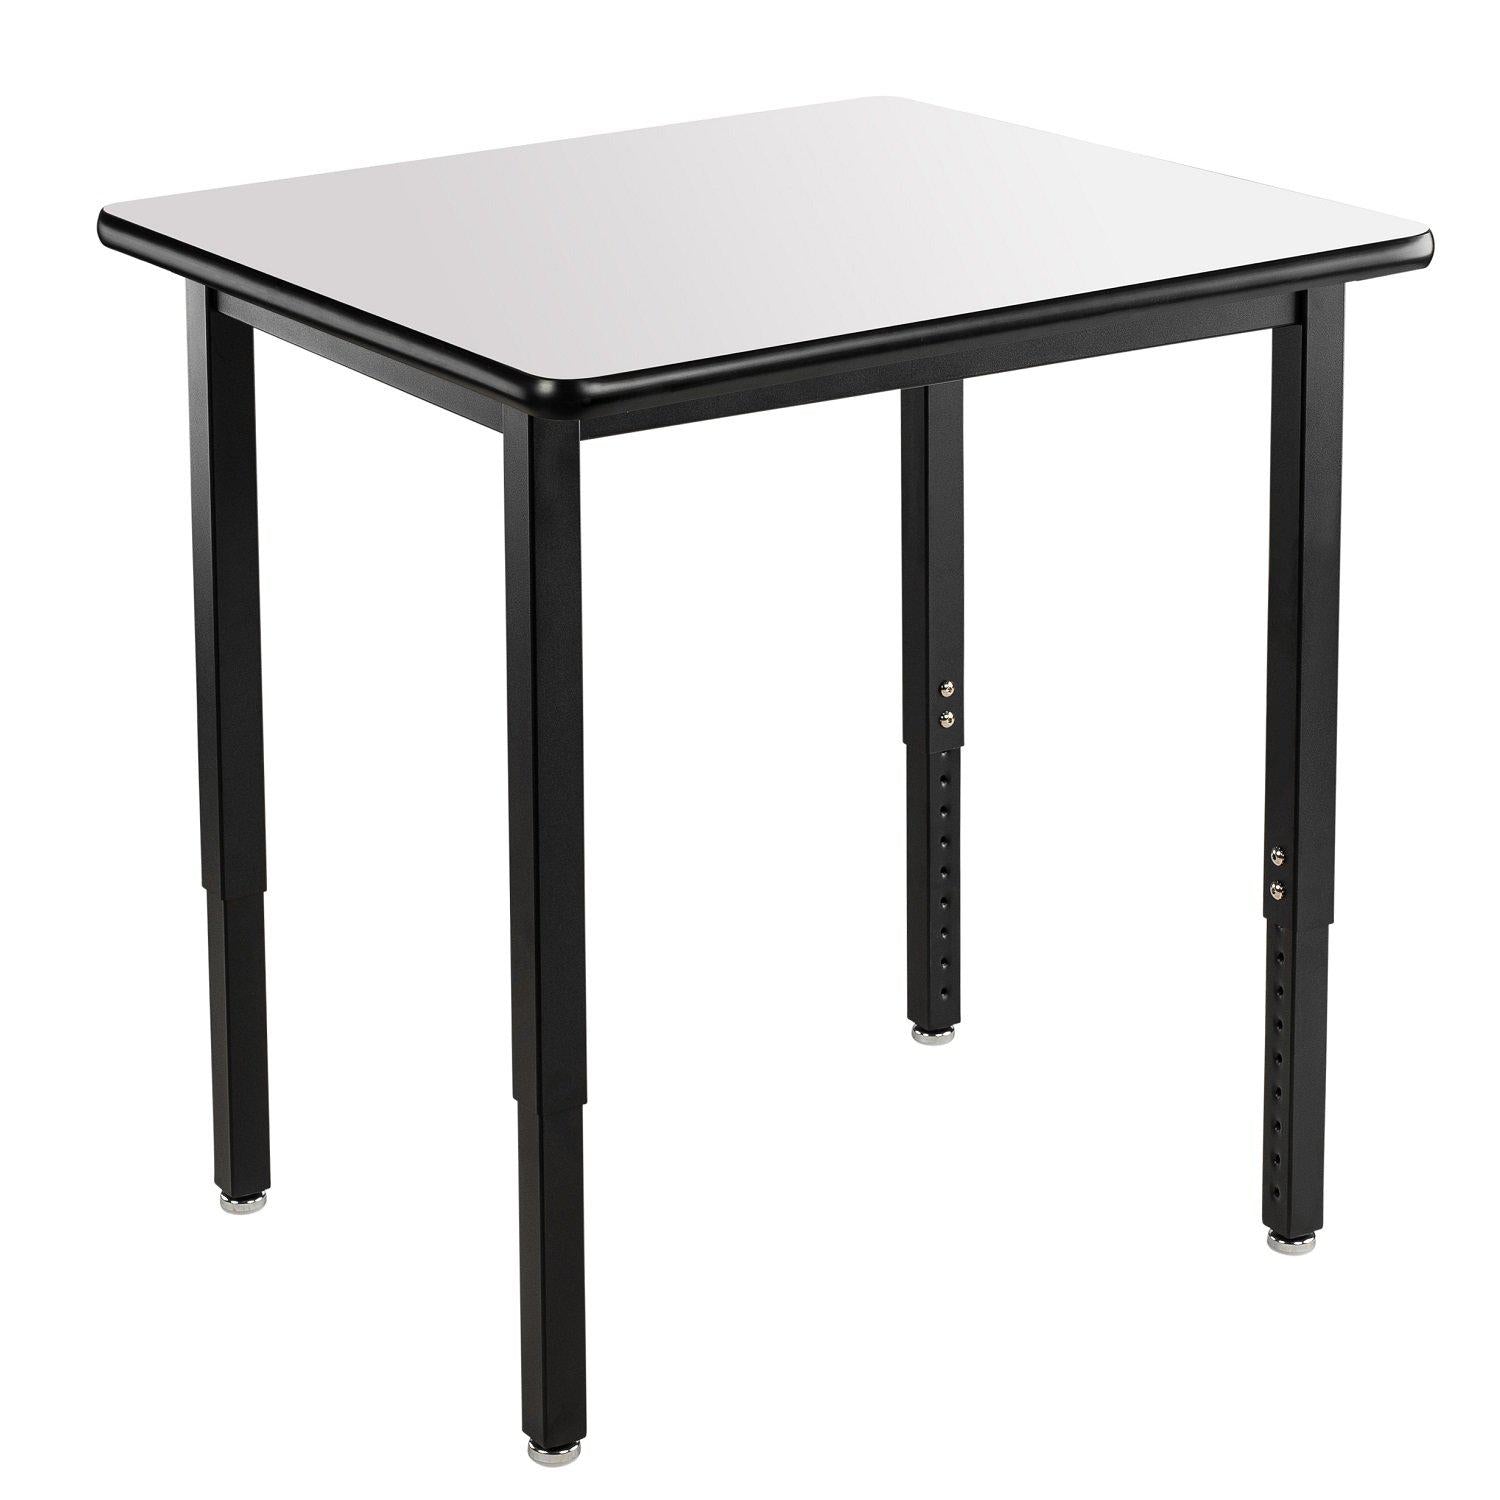 Heavy-Duty Height-Adjustable Utility Table, Black Frame, 30" x 30", Whiteboard High-Pressure Laminate Top